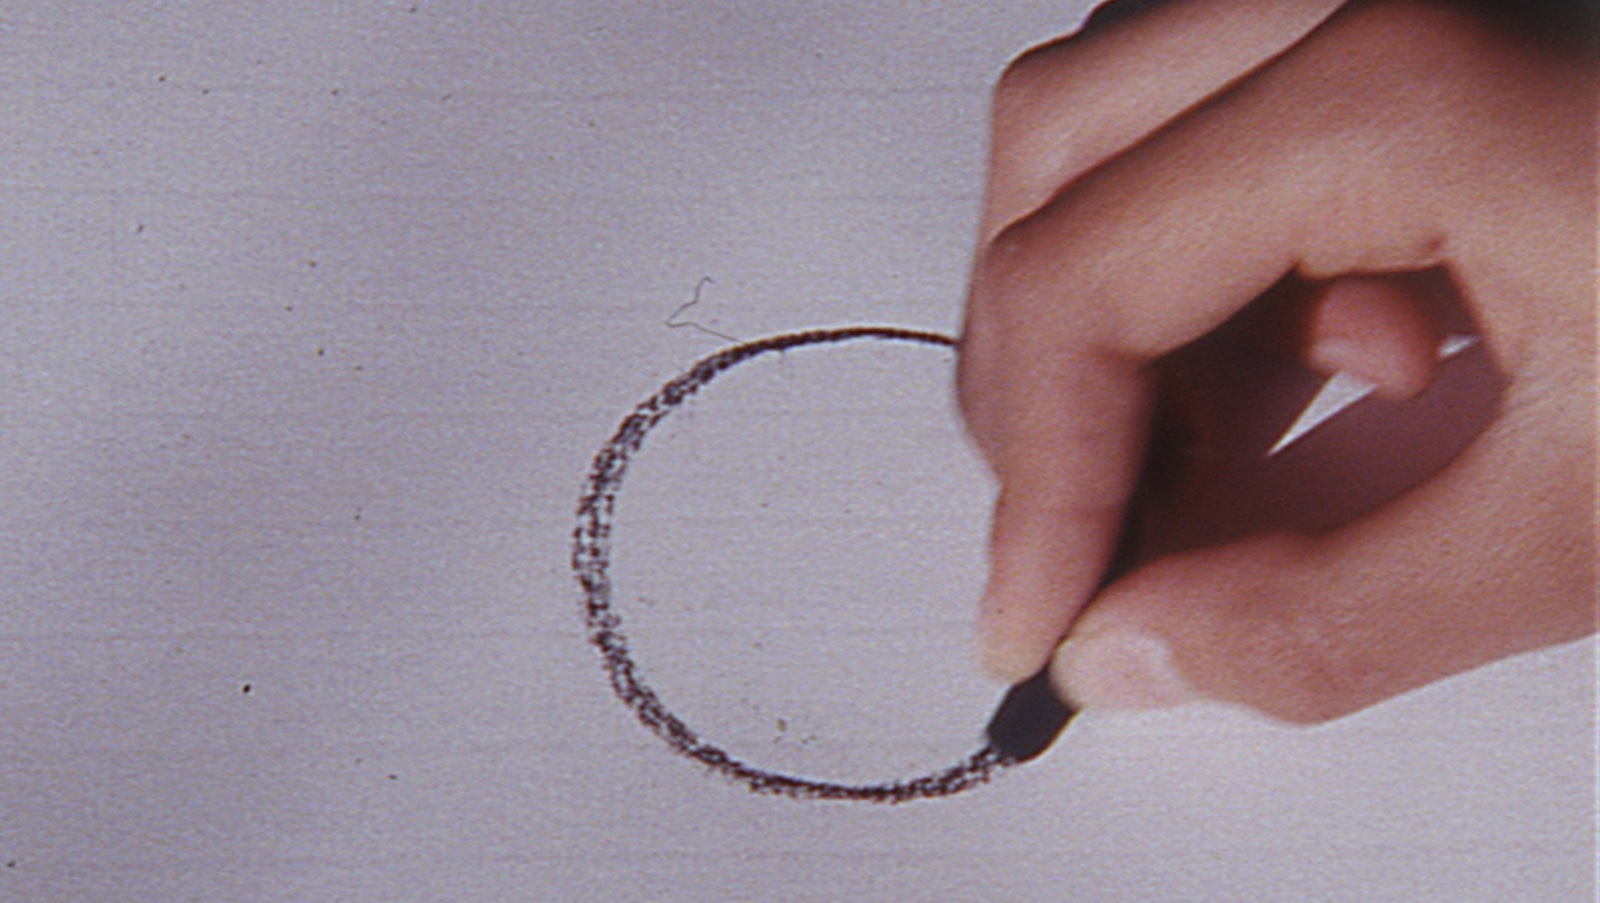 A hand draws a circle on paper